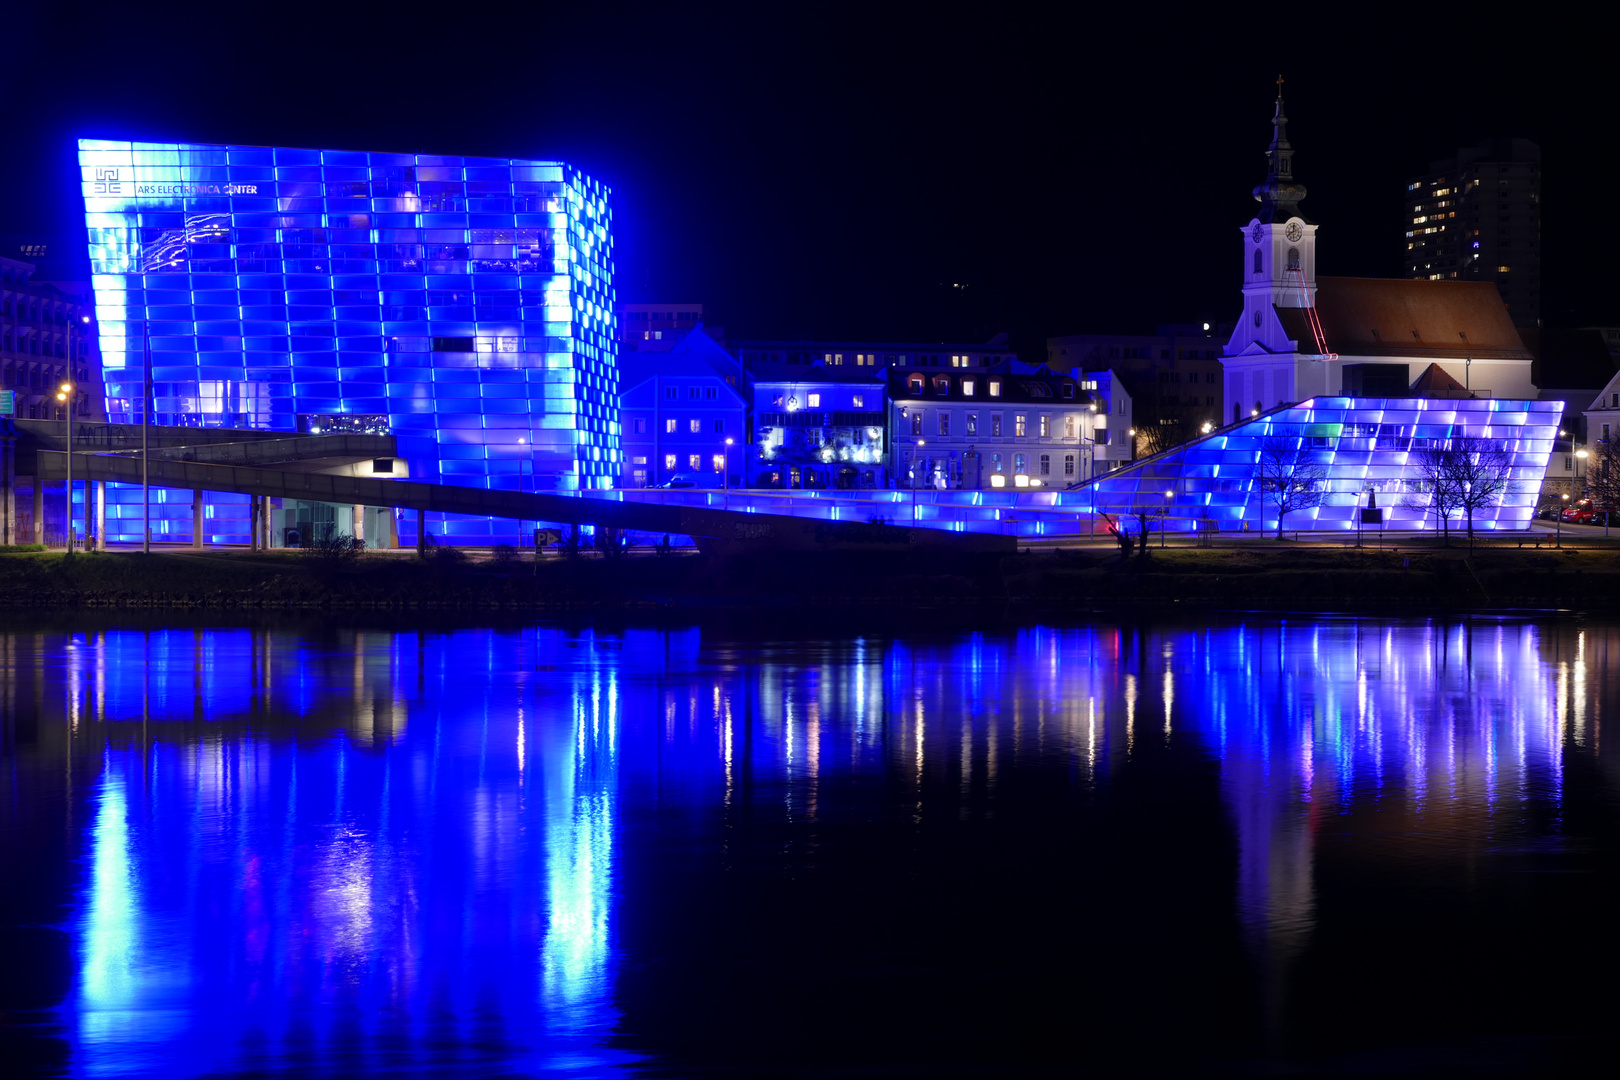 Blue Glowing - Ars Electronica Center